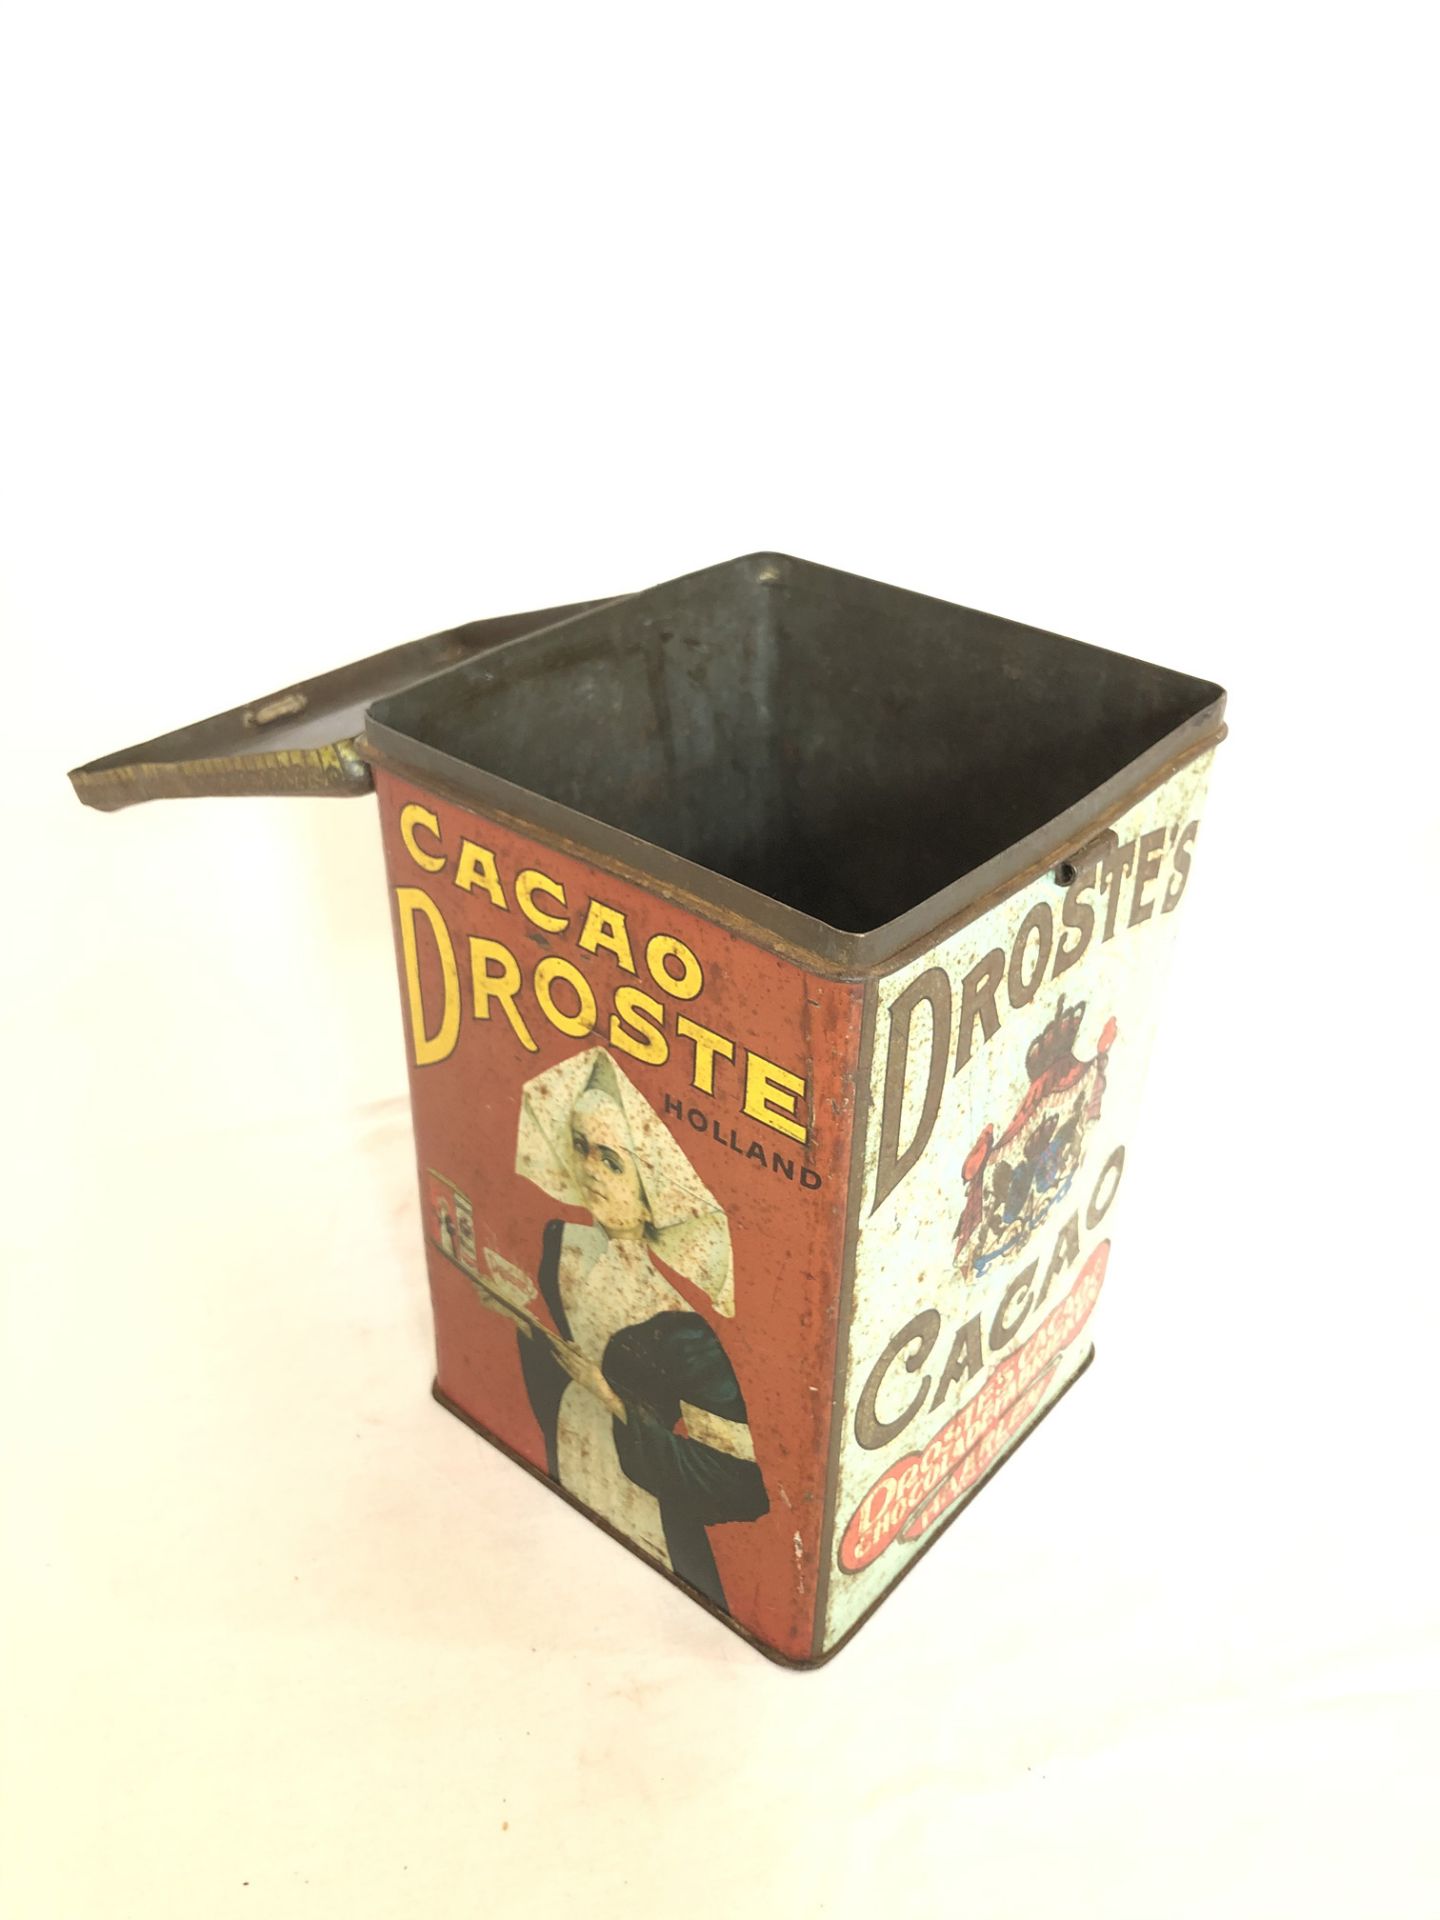 Tin Box Droste's Cacao Holland - Image 3 of 4